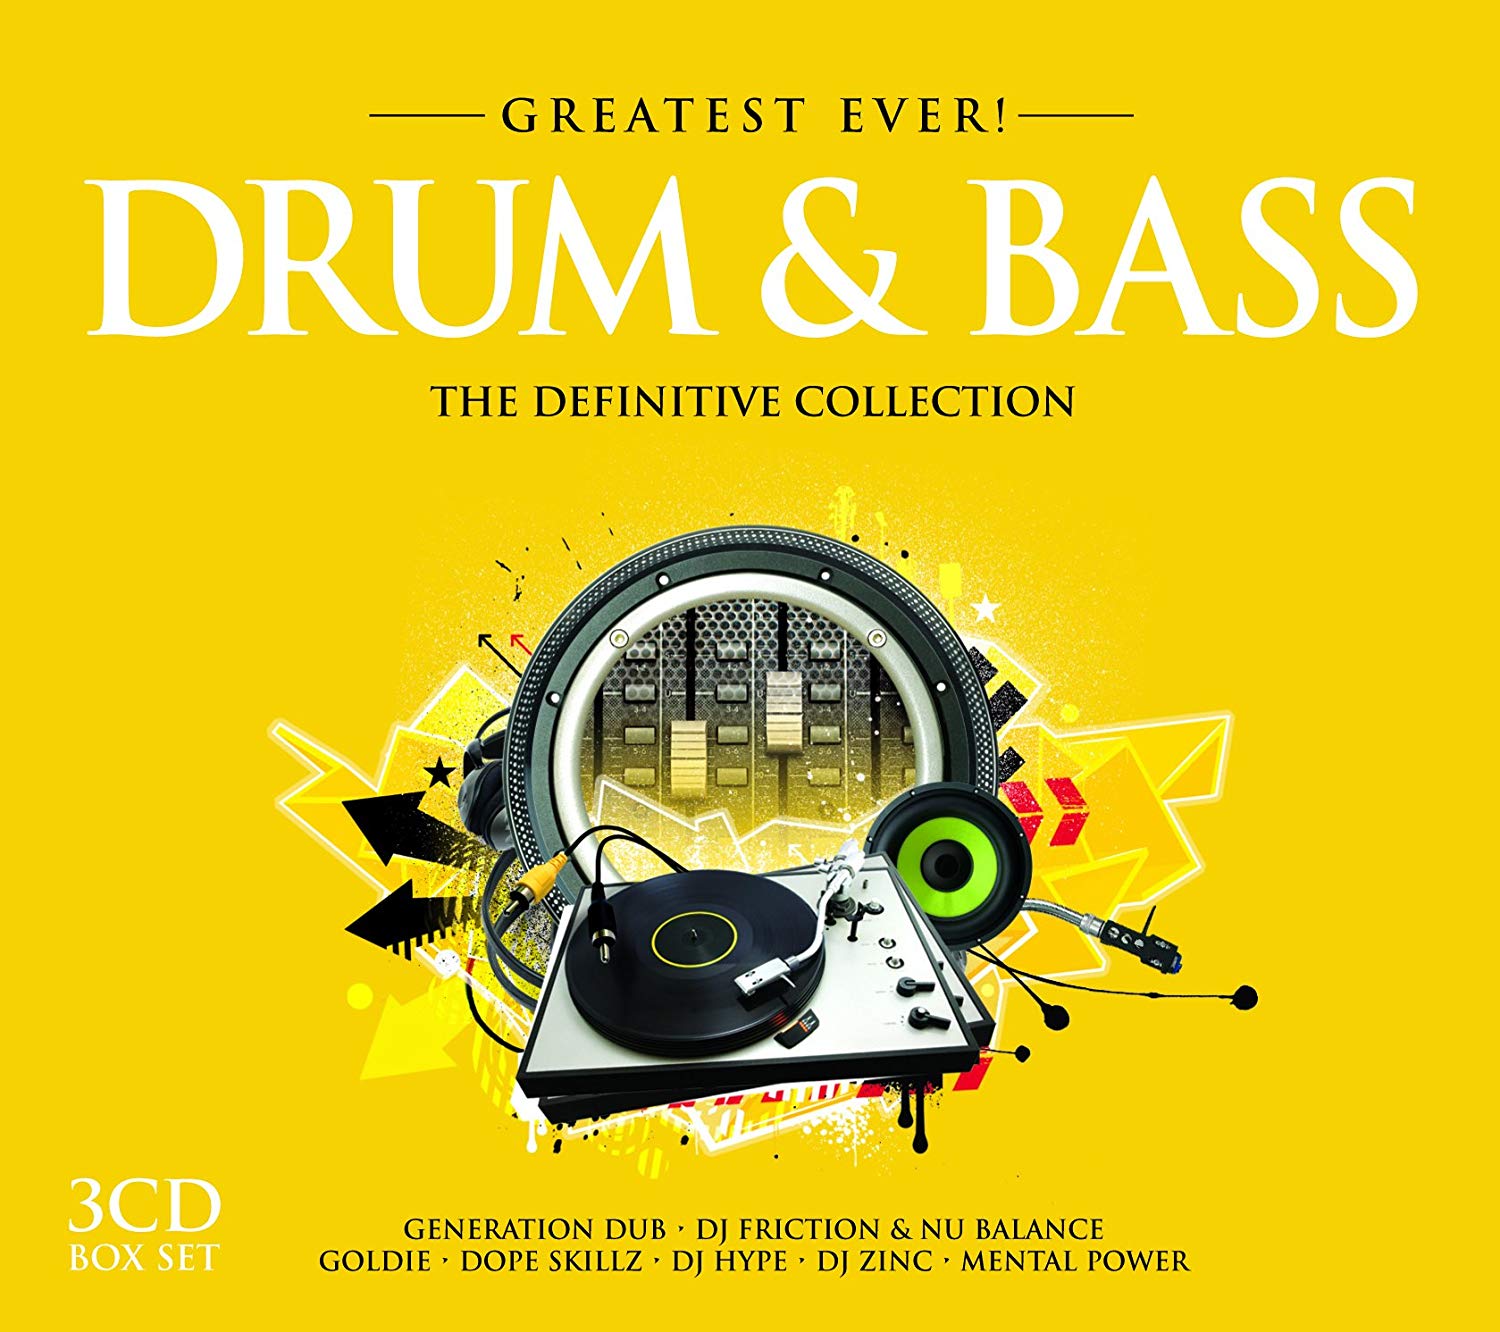 Бас мп 3. Drum and Bass. Drum n Bass станция. Bass CD. Drum and Bass collection.